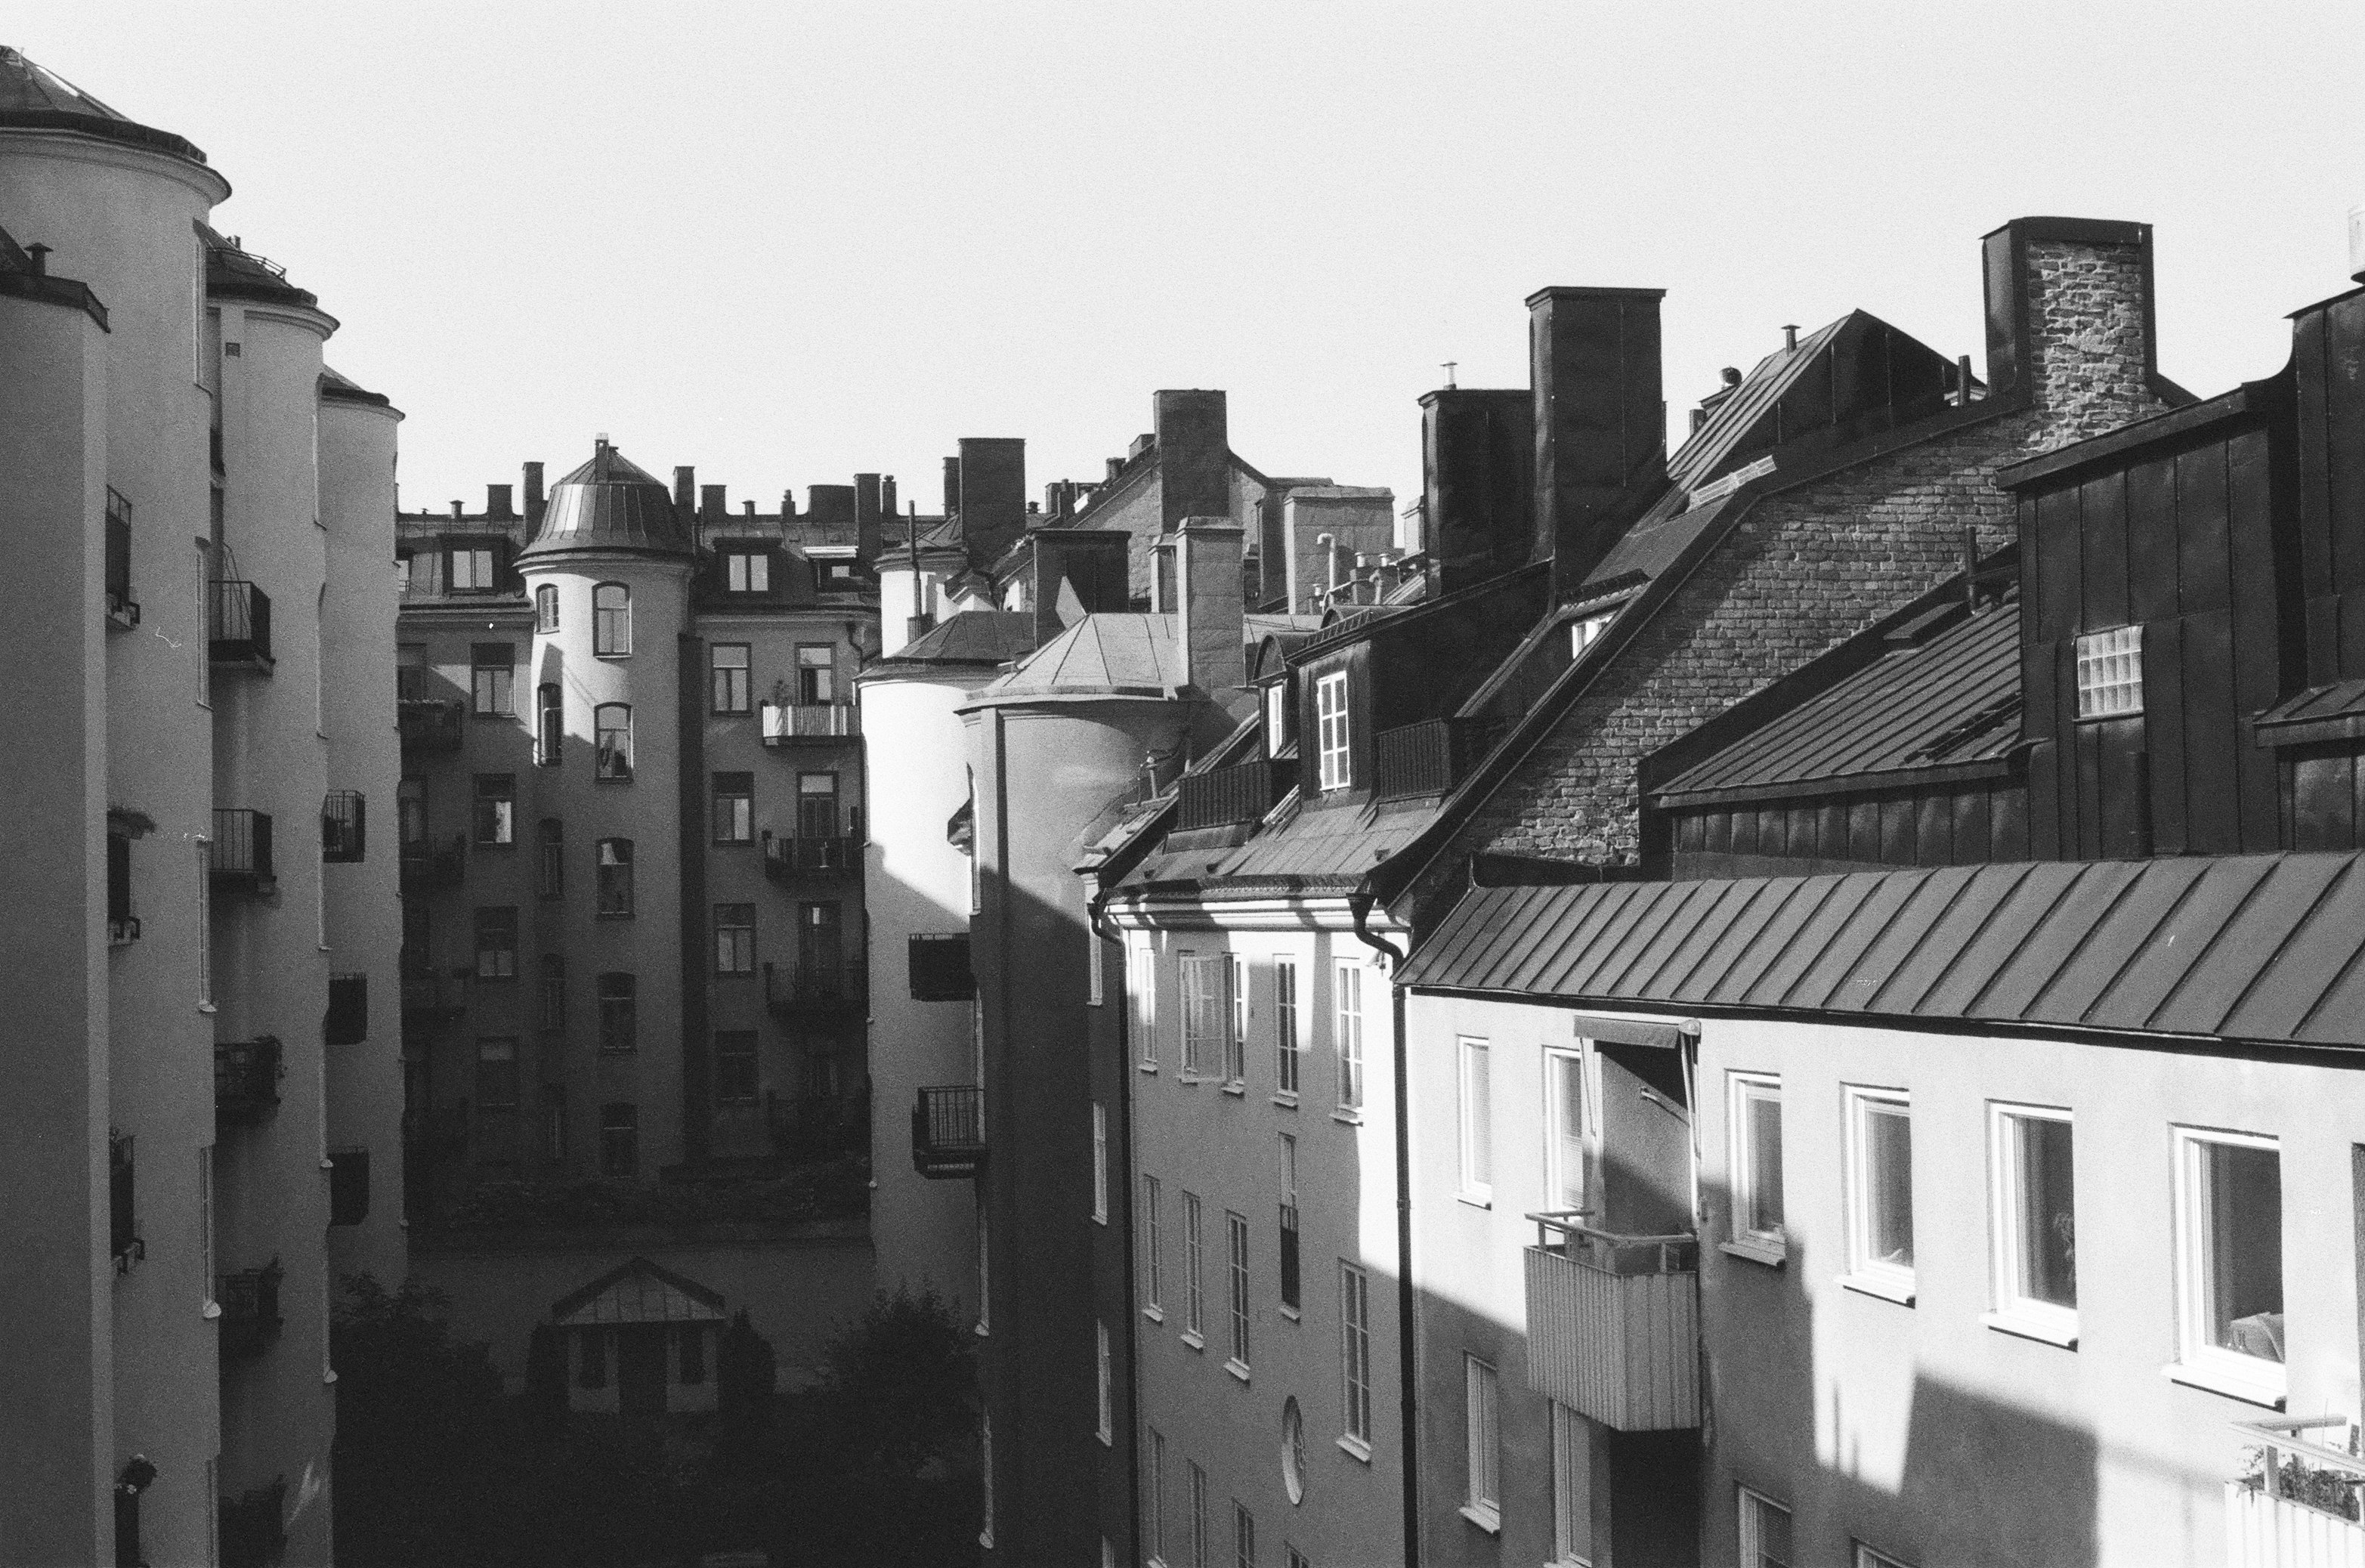 grayscale photo of houses during daytime